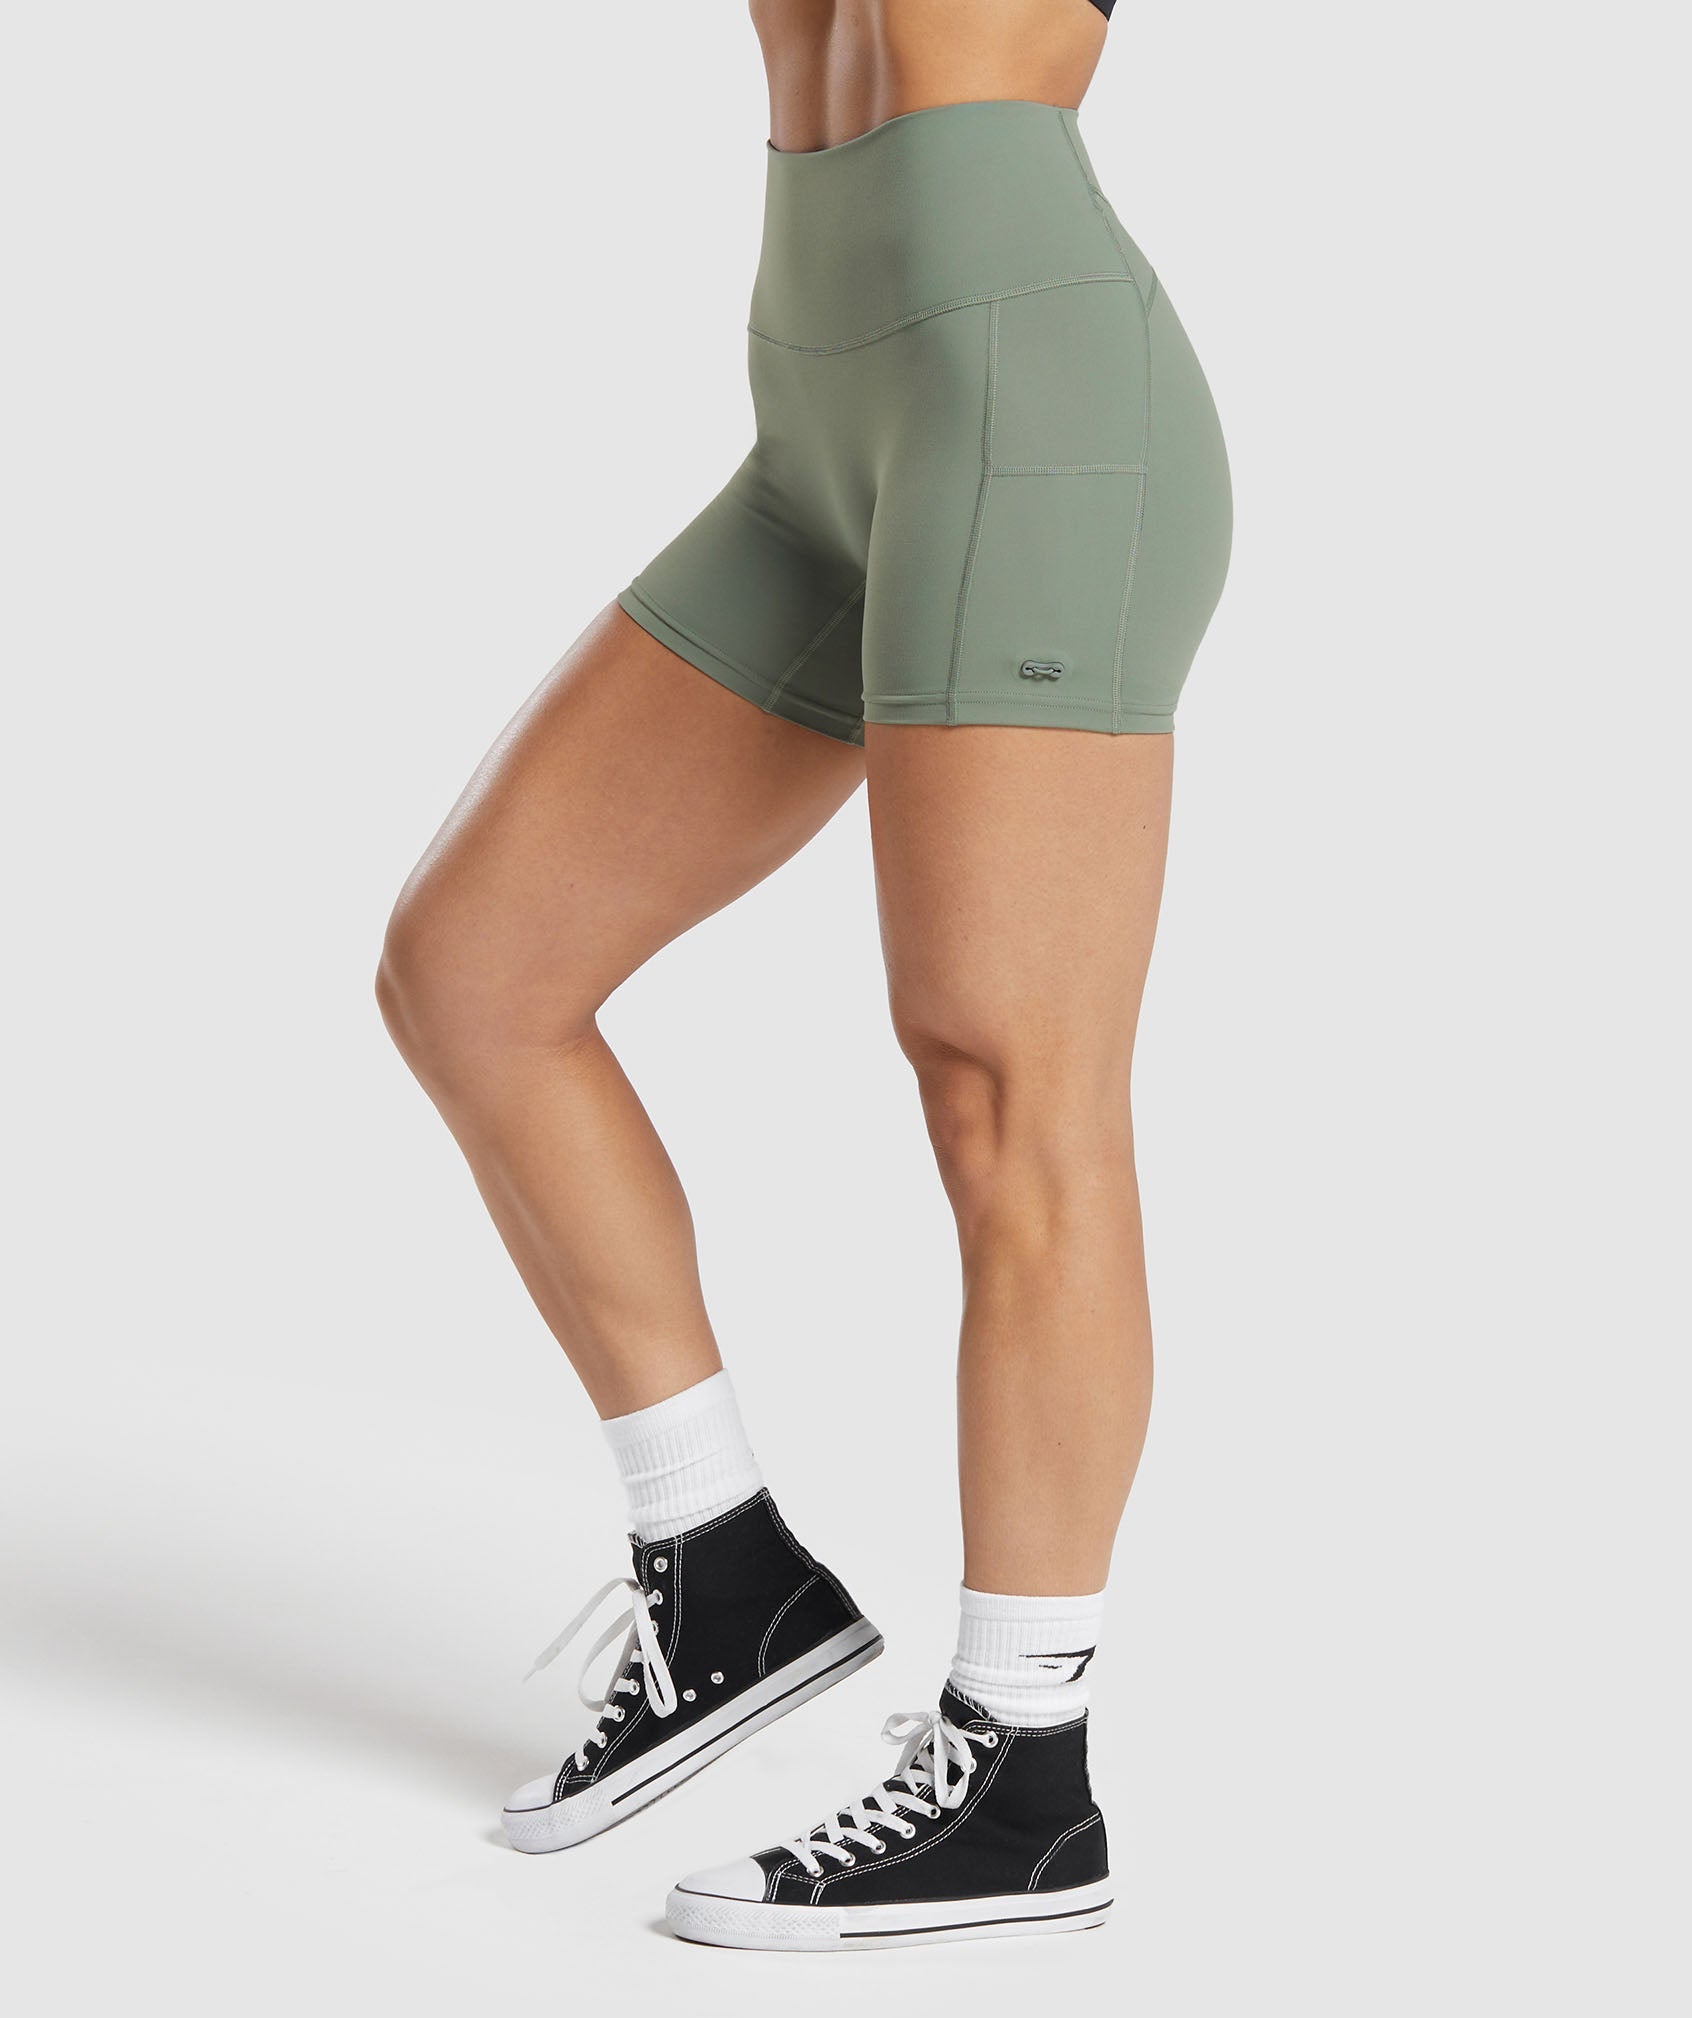 Legacy Tight Shorts in Unit Green - view 3